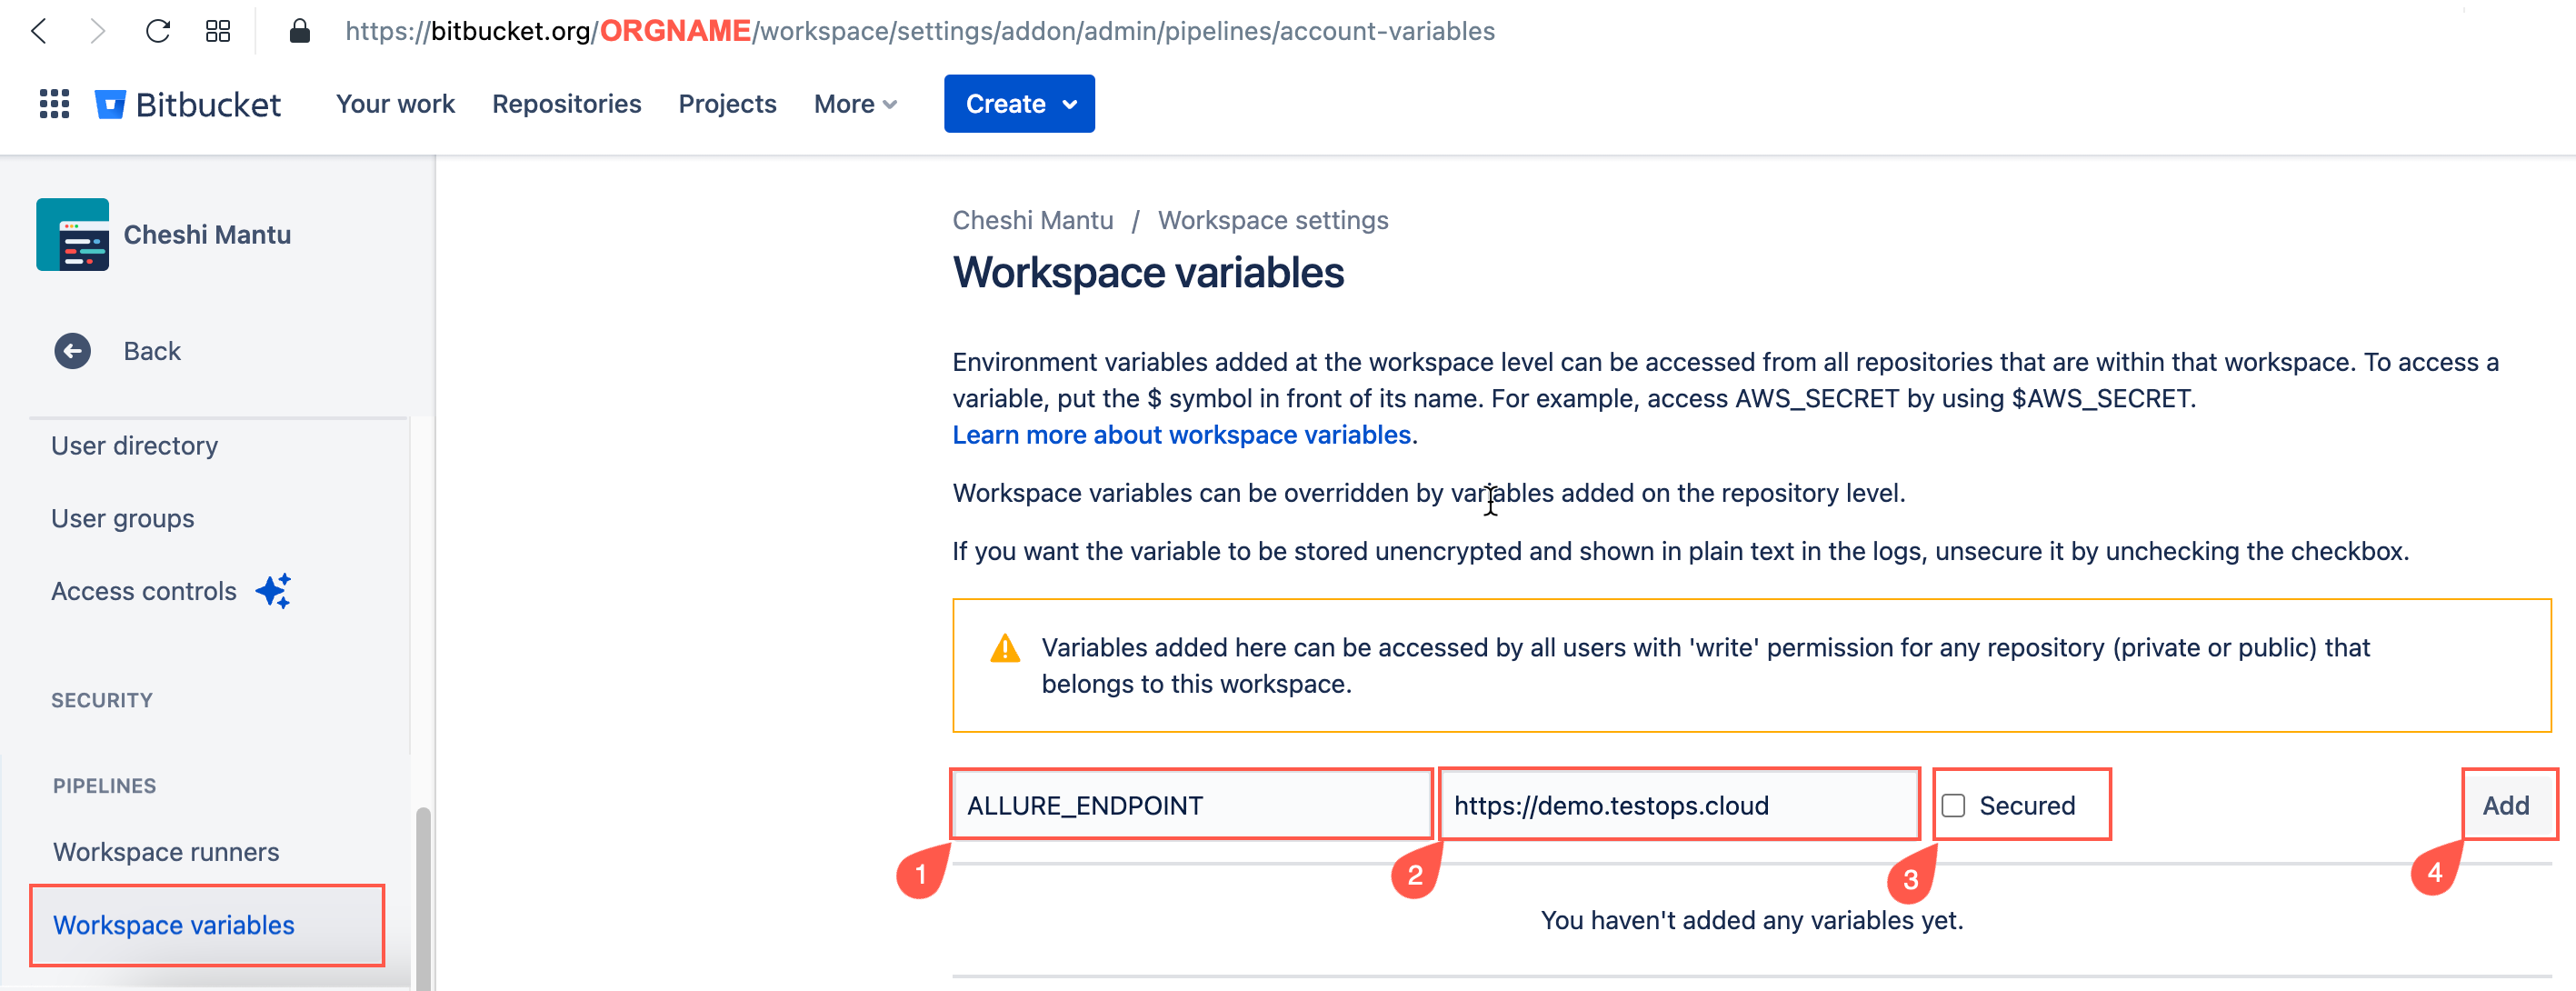 Add ALLURE_ENDPOINT to workspace vars